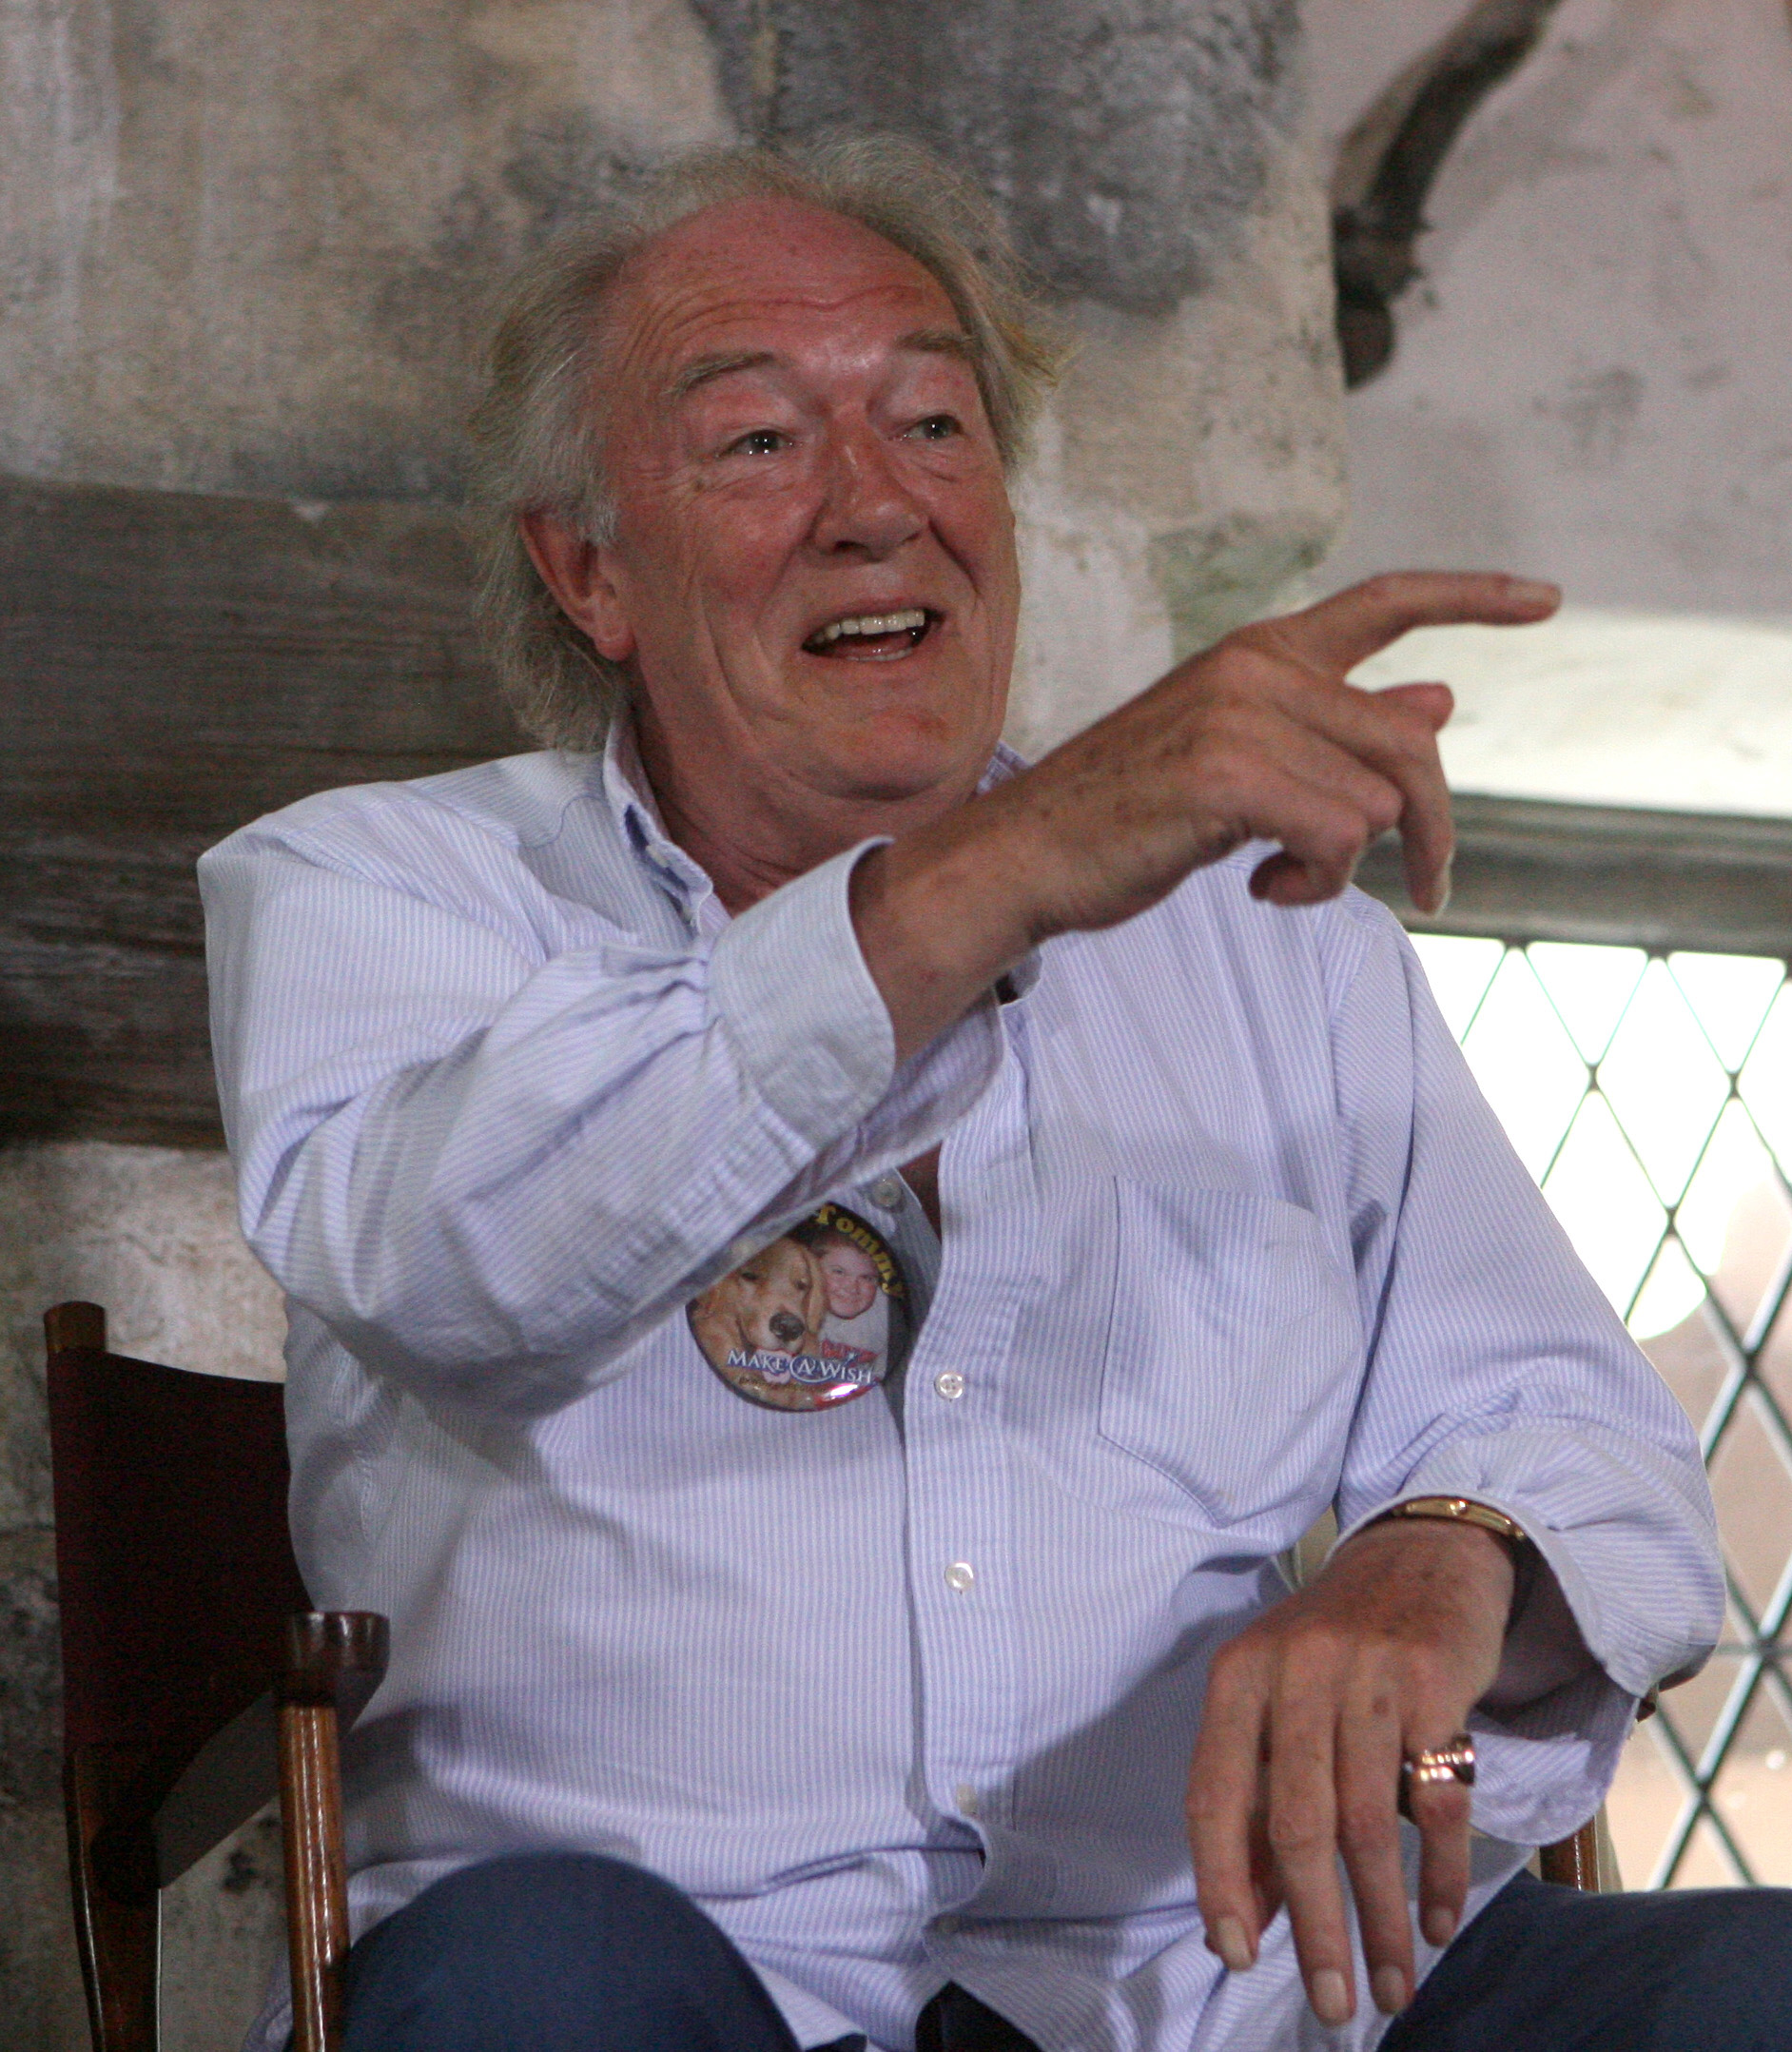 Michael Gambon speaks to the media during a "Harry Potter" film series actor gathering at Universal Orlando's Wizarding World on June 17, 2010, in Orlando, Florida | Source: Getty Images